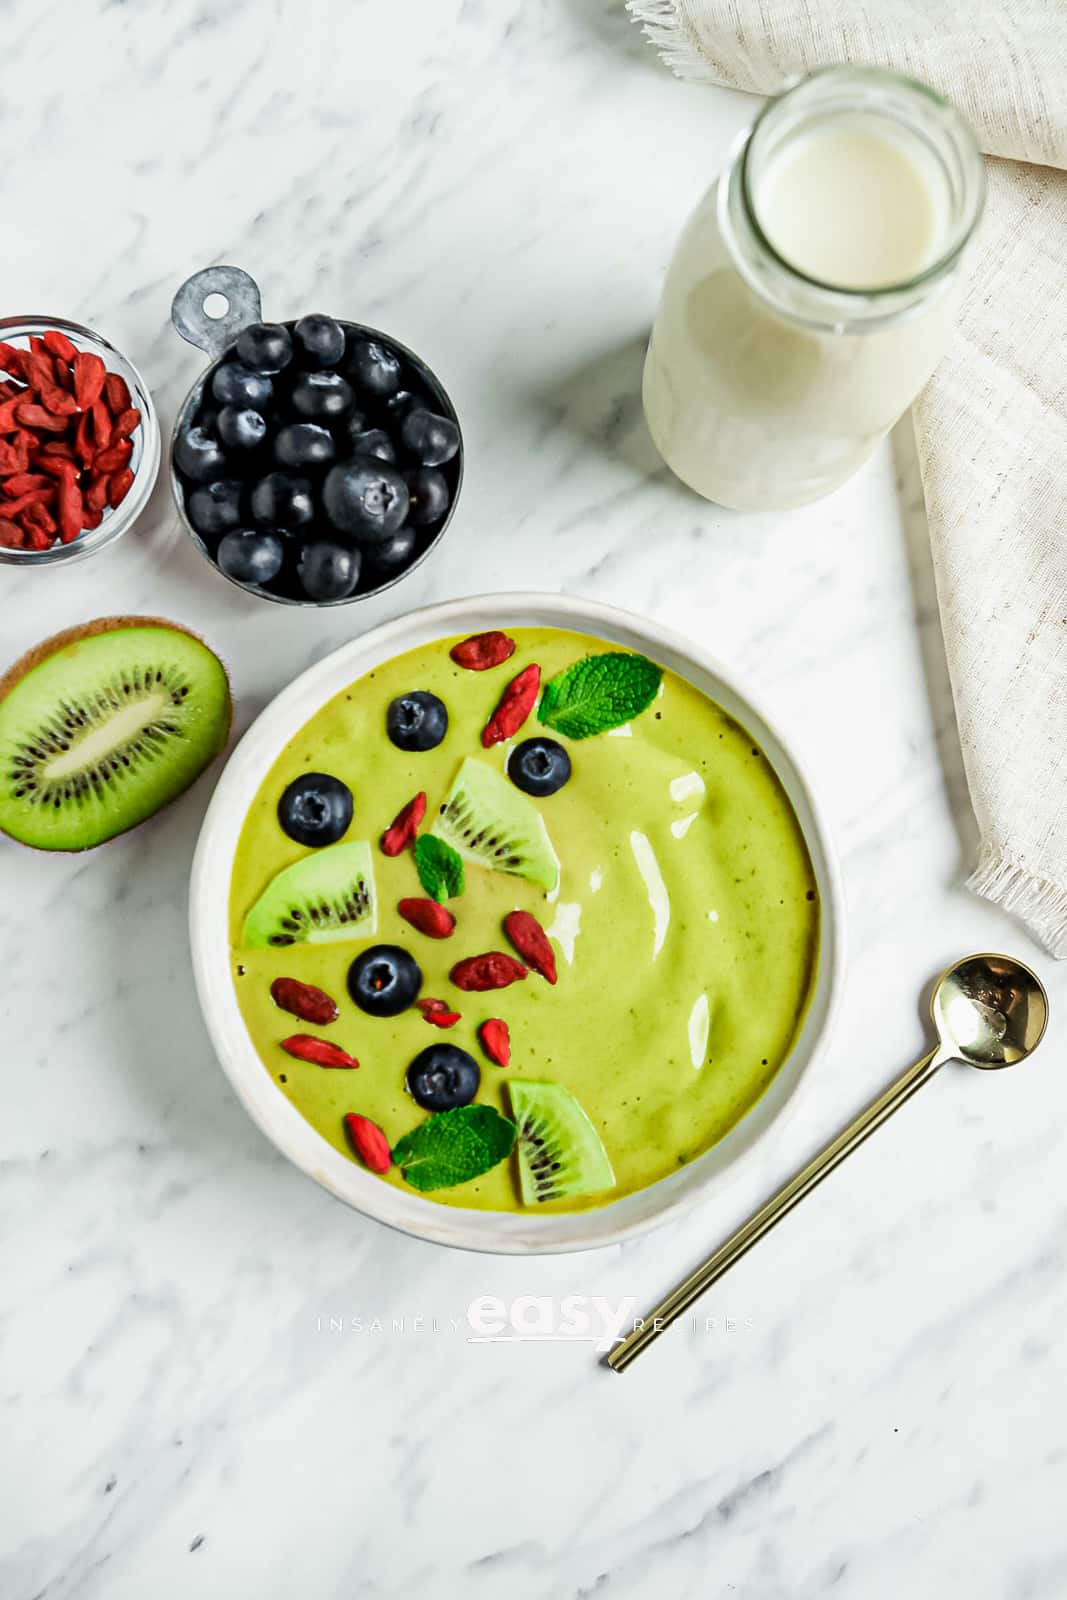 top view photo of a Matcha Bowl with sliced kiwis, goji berries, blueberries, and mint leaves on top. There is a gold spoon below the bowl and blueberries, half a kiwi, goji berries, and a jar of coconut milk above the bowl.